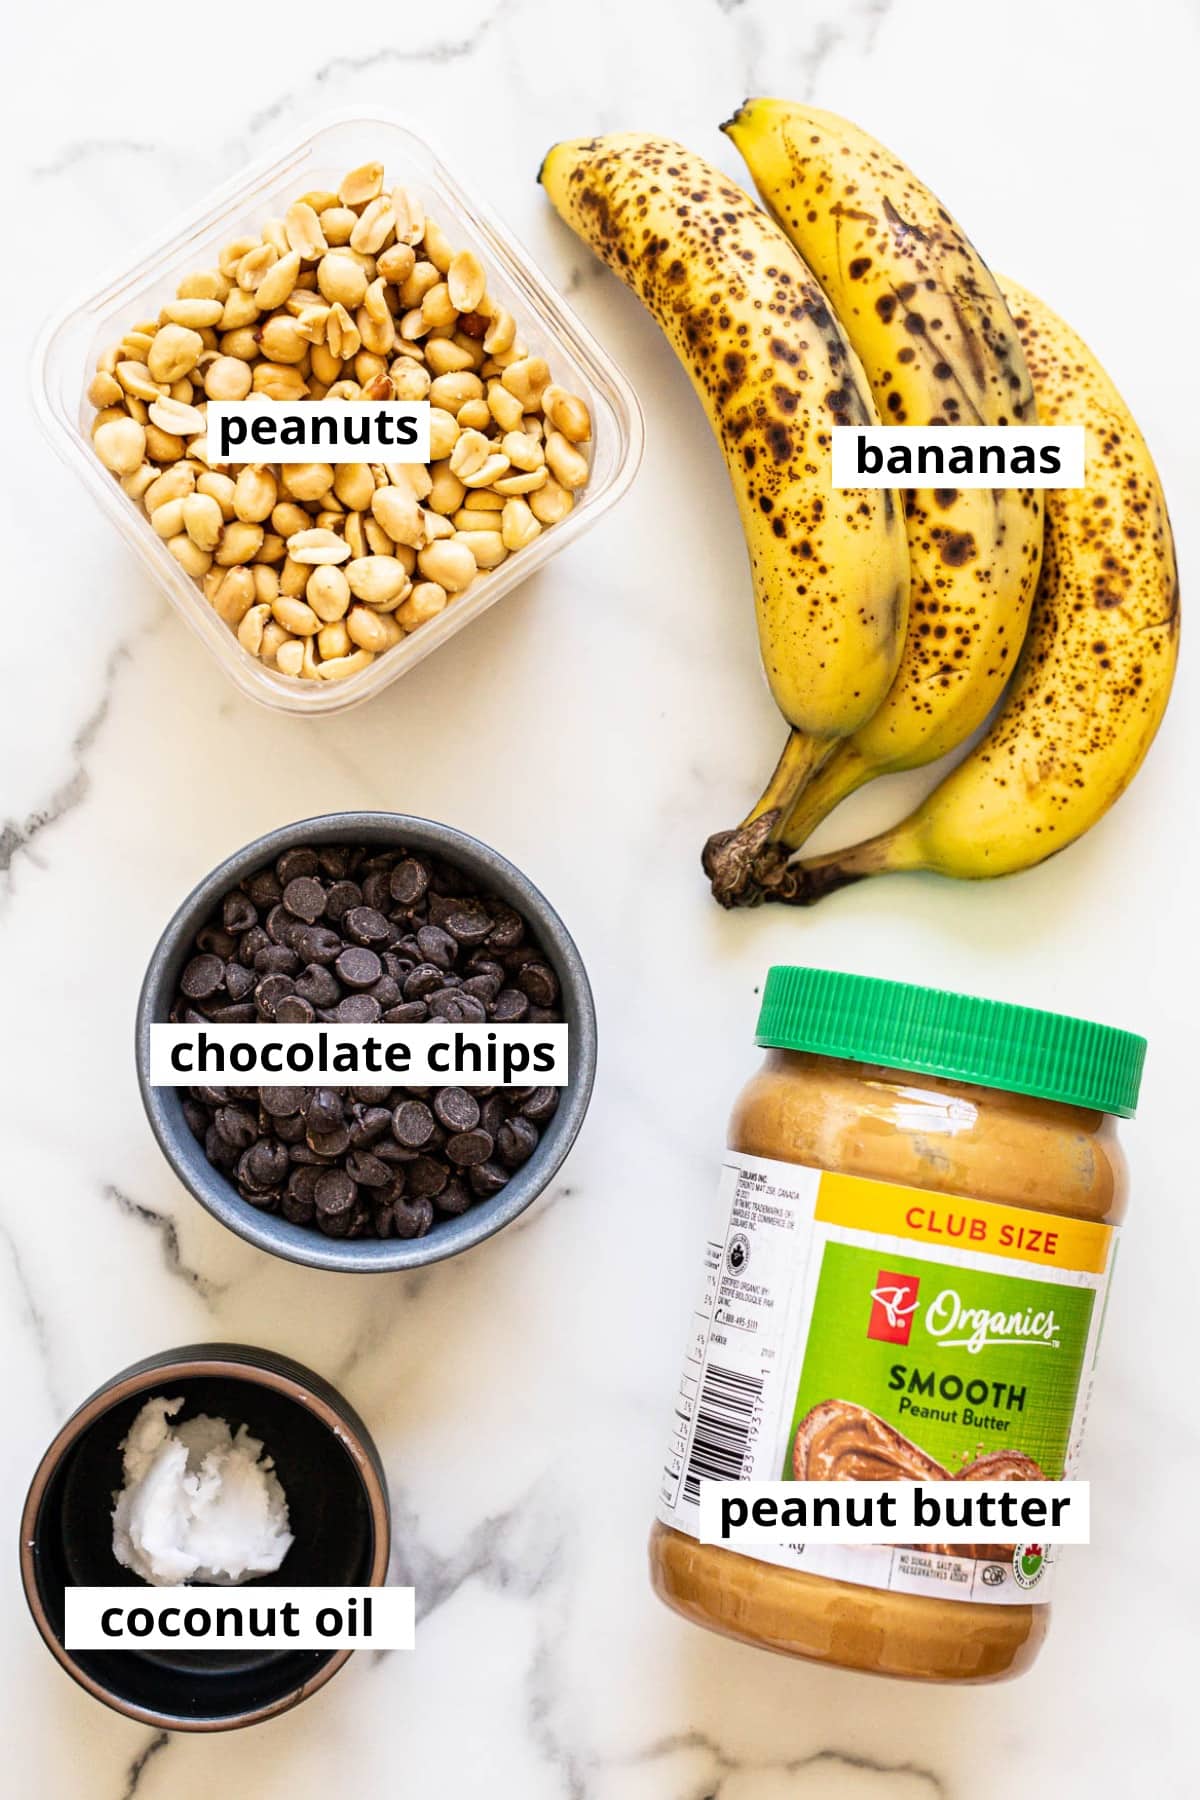 Peanut butter, bananas, peanuts, chocolate chips, coconut oil.